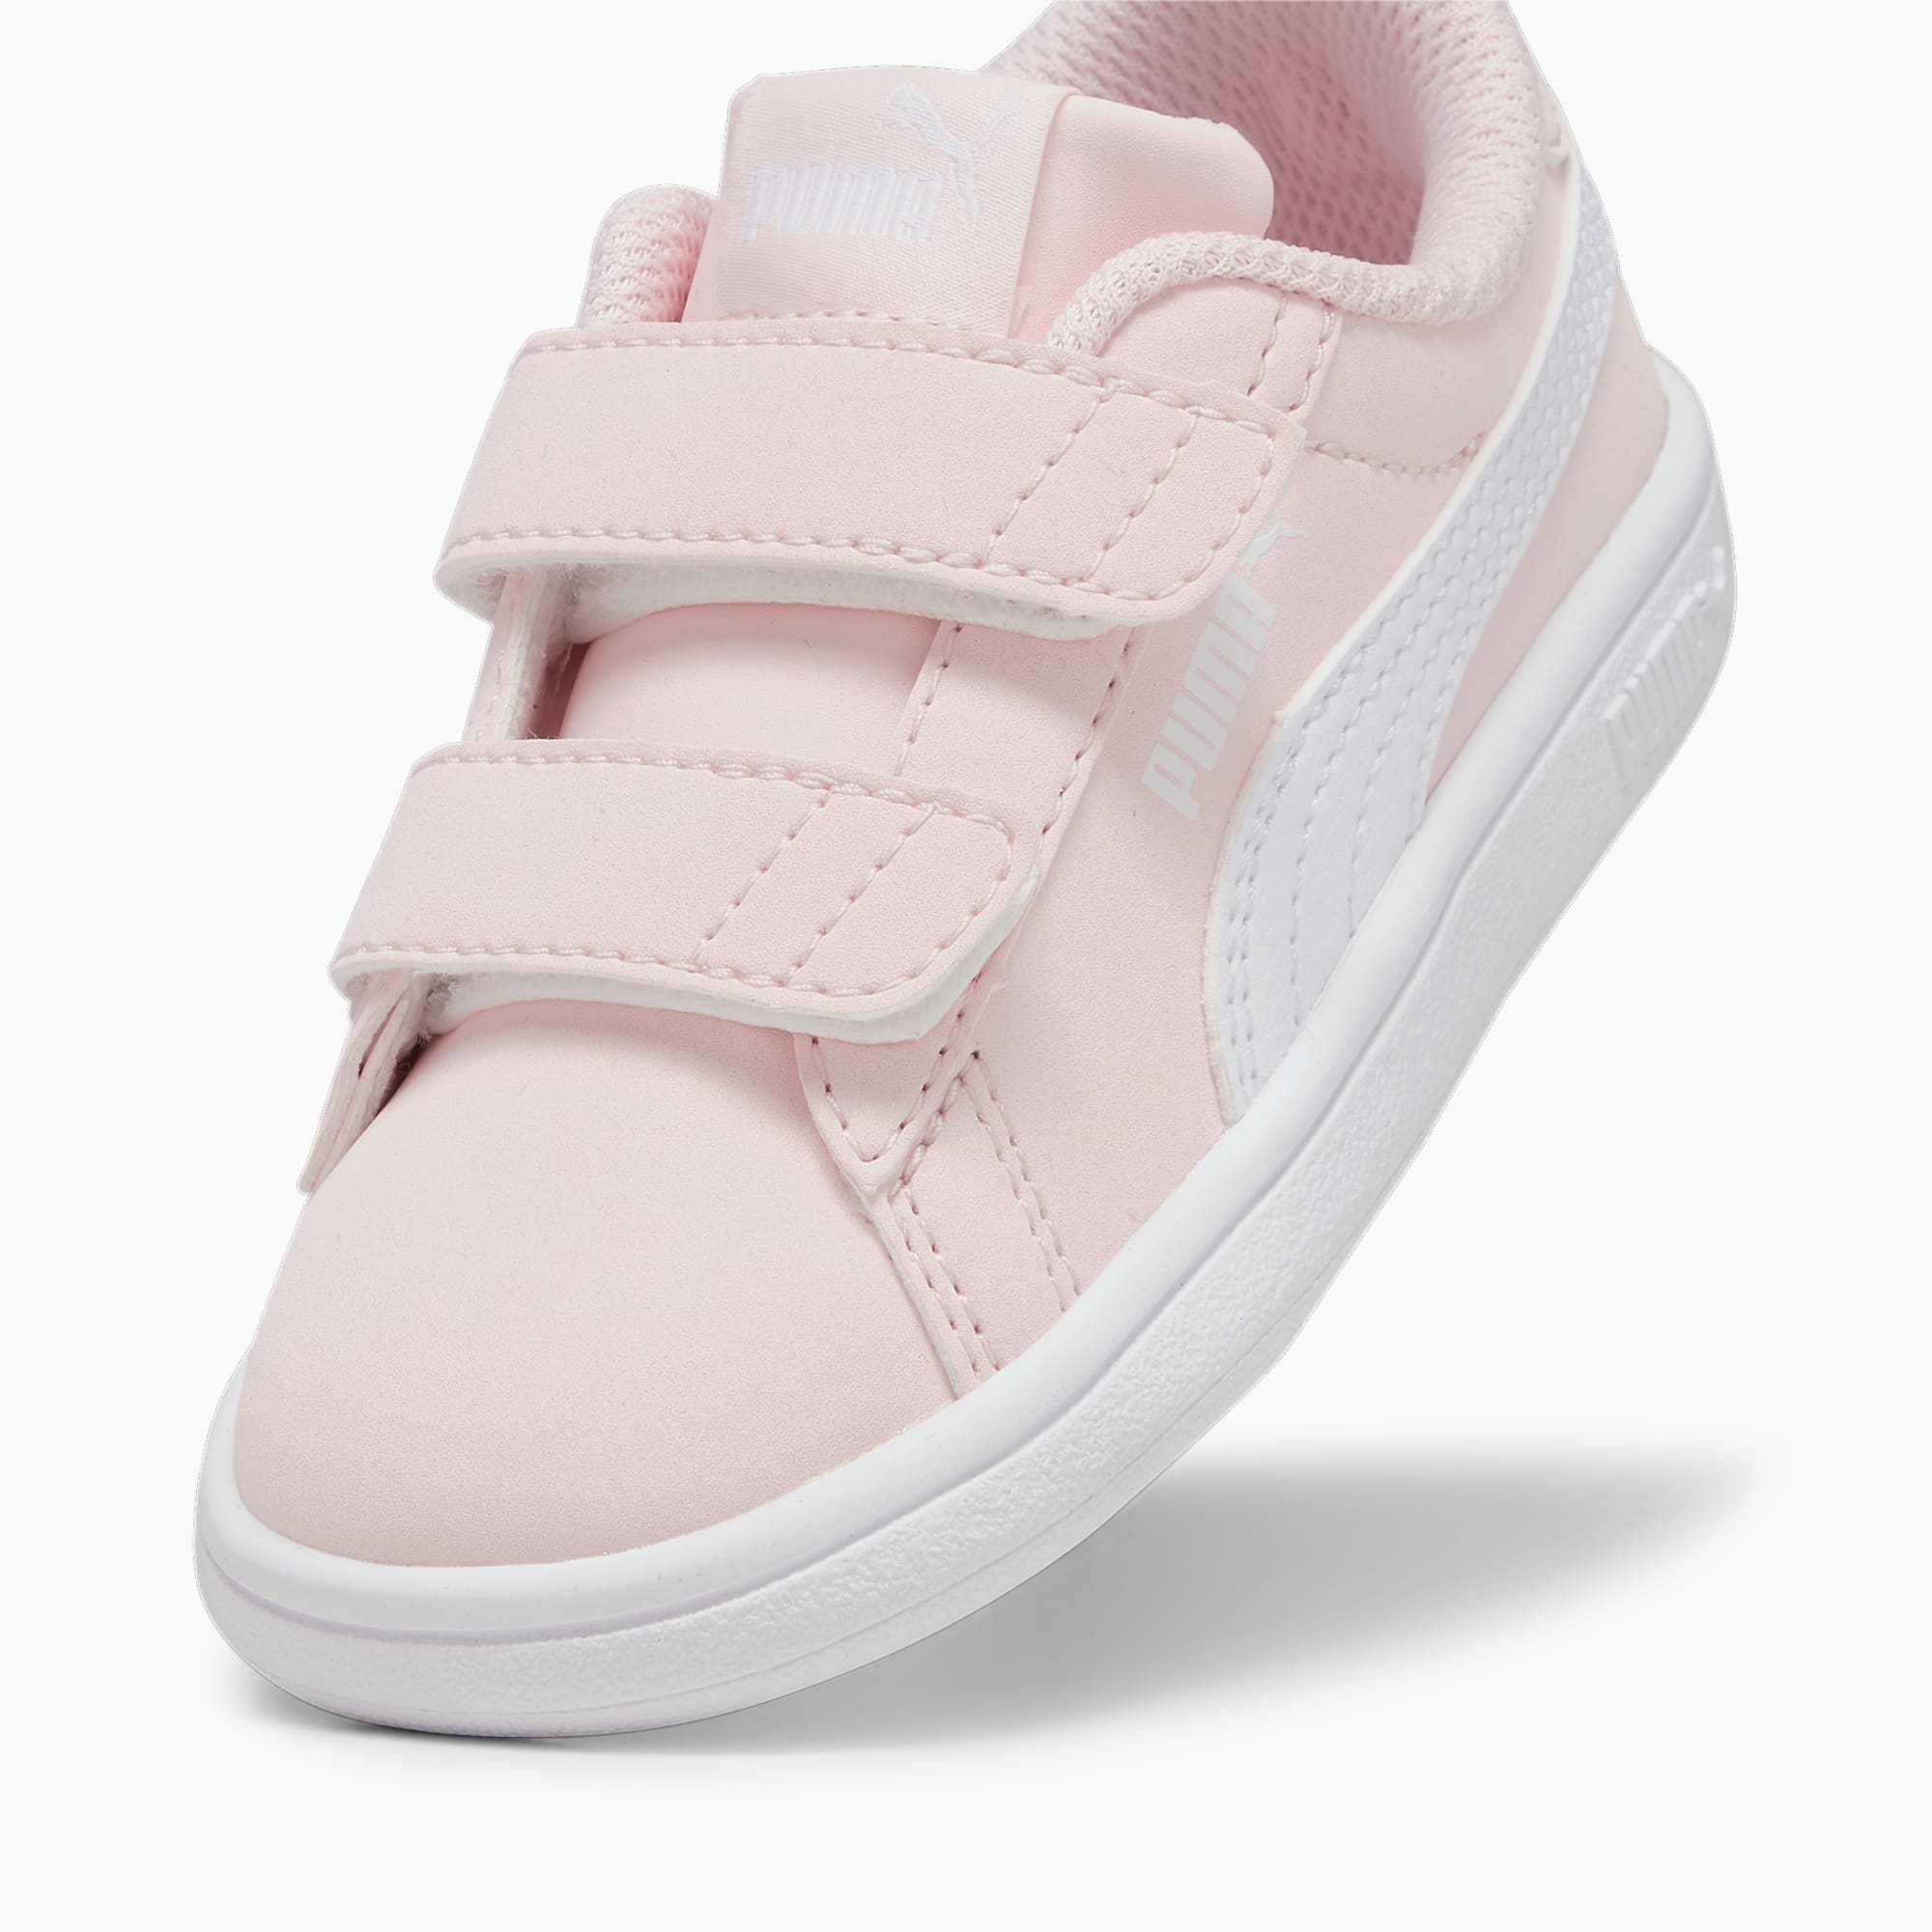 PUMA Smash 3.0 Buck Sneakers Baby, Frosty Pink/White, Size 19, Shoes